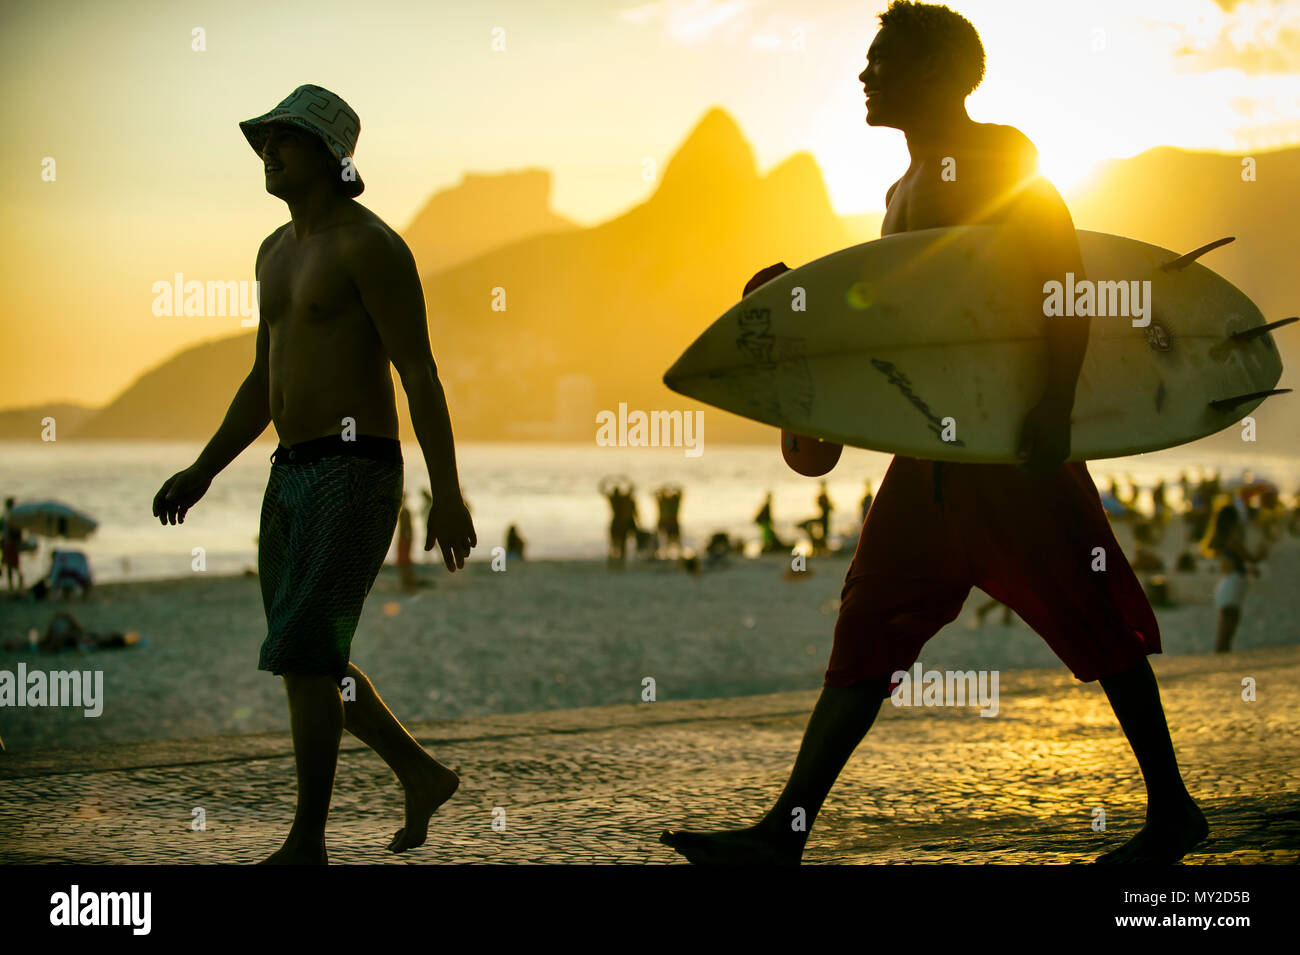 RIO DE JANEIRO - MARCH 20, 2017: Sunset silhouettes of two young surfers with surfboard at Arpoador, Ipanema with two brothers mountain in background Stock Photo